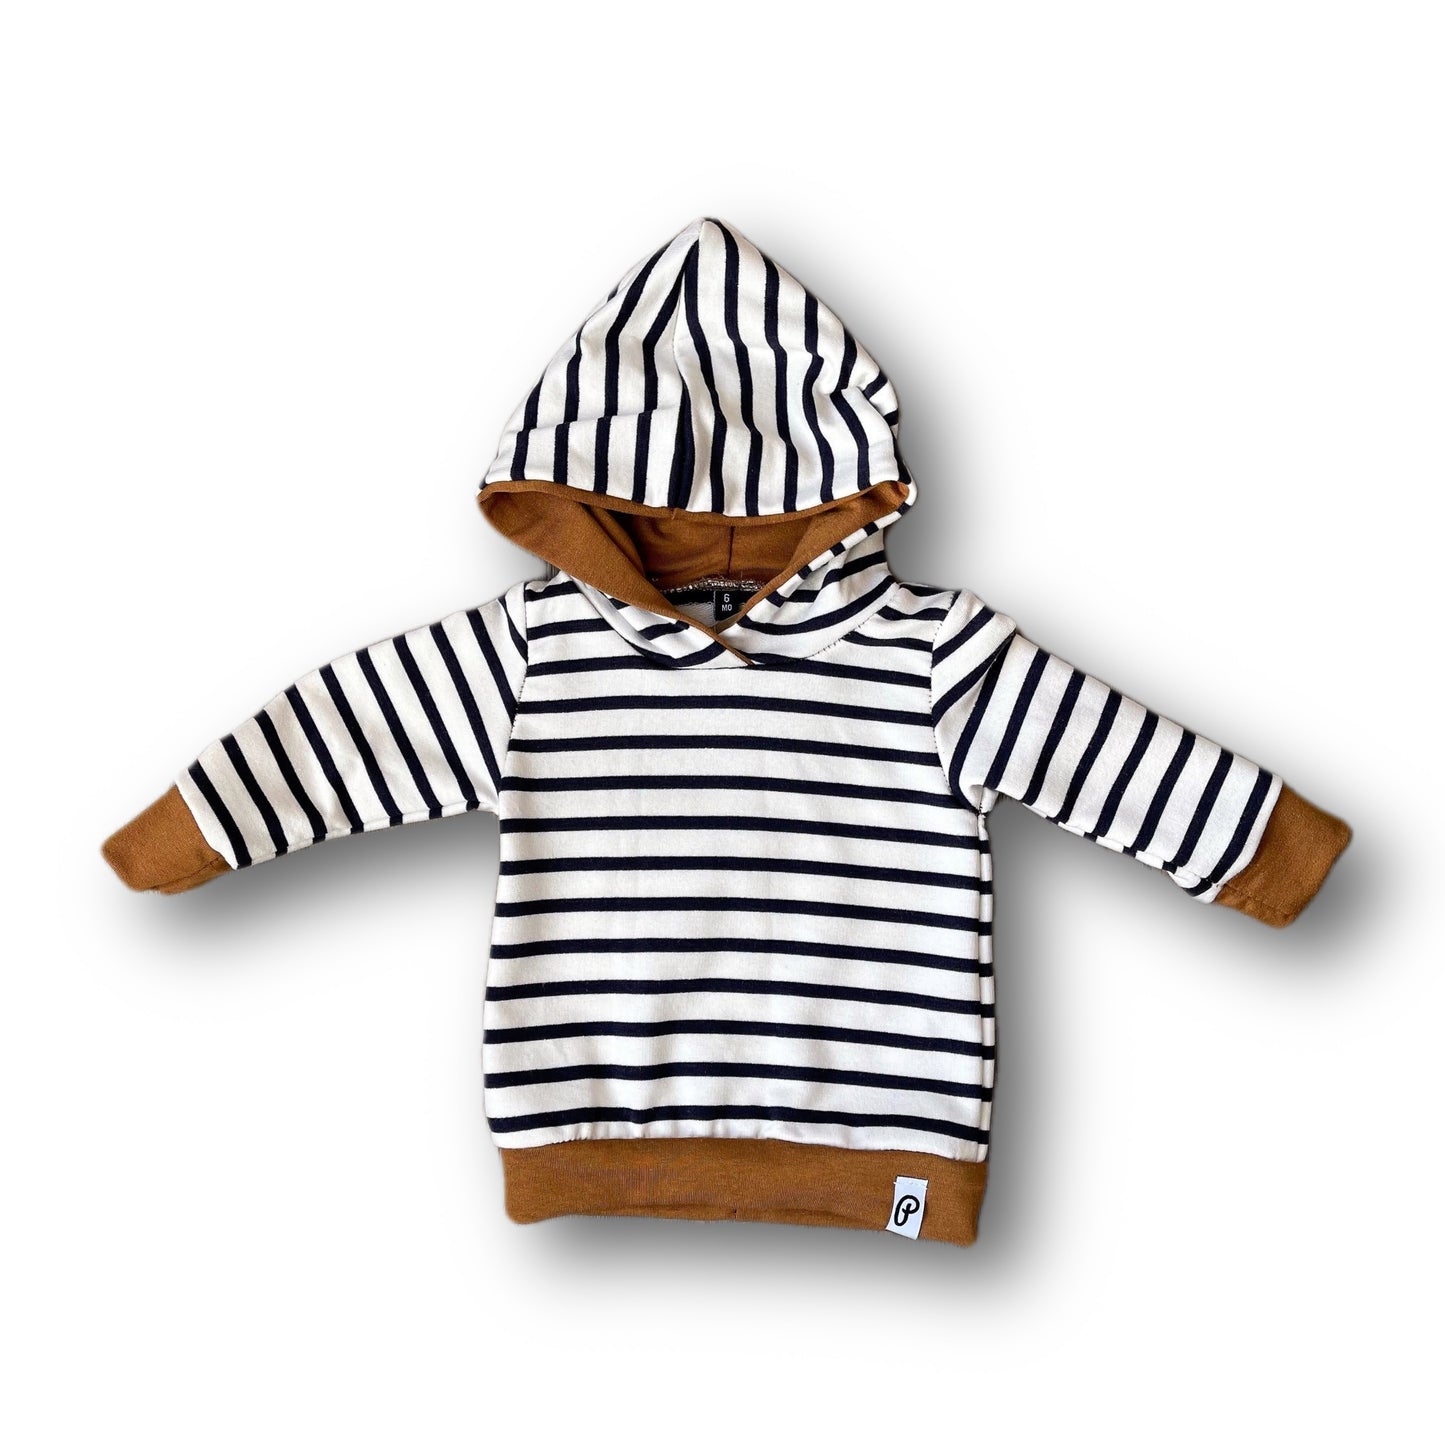 Kids Bamboo Hoodie with Baggy Pants - Navy Striped and Butterscotch